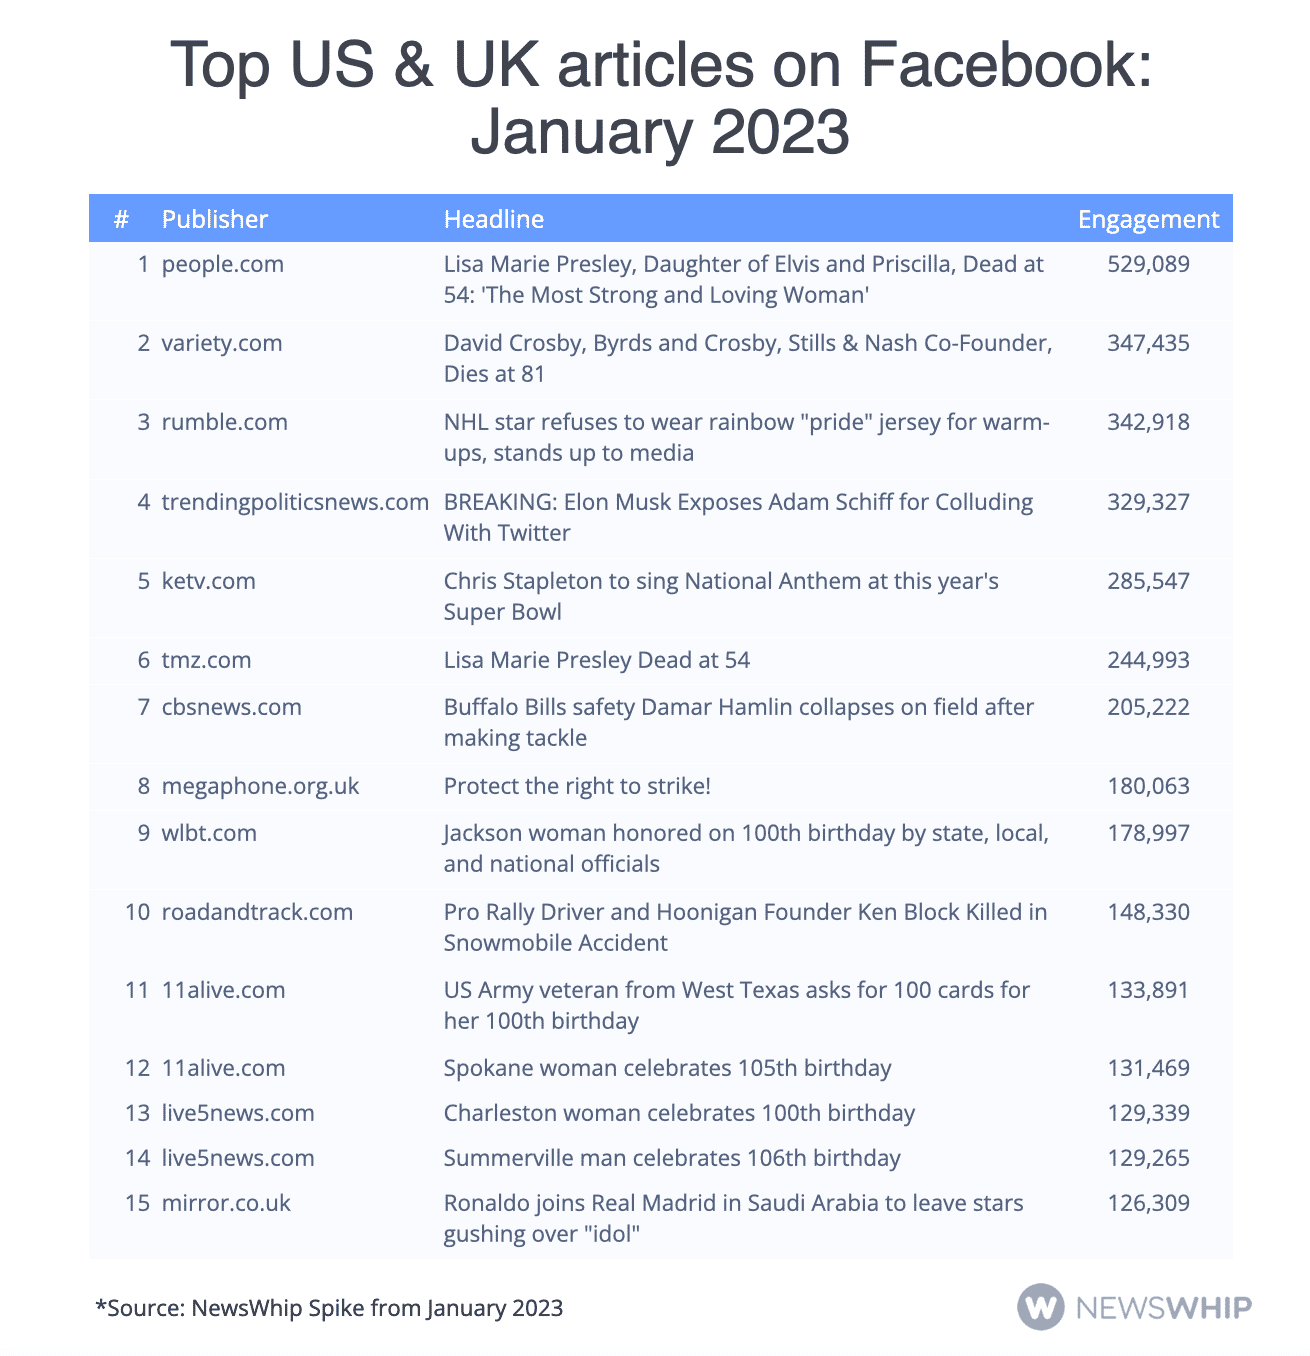 Table showing the top articles on Facebook in January 2023 from the UK and US, ranked by engagement